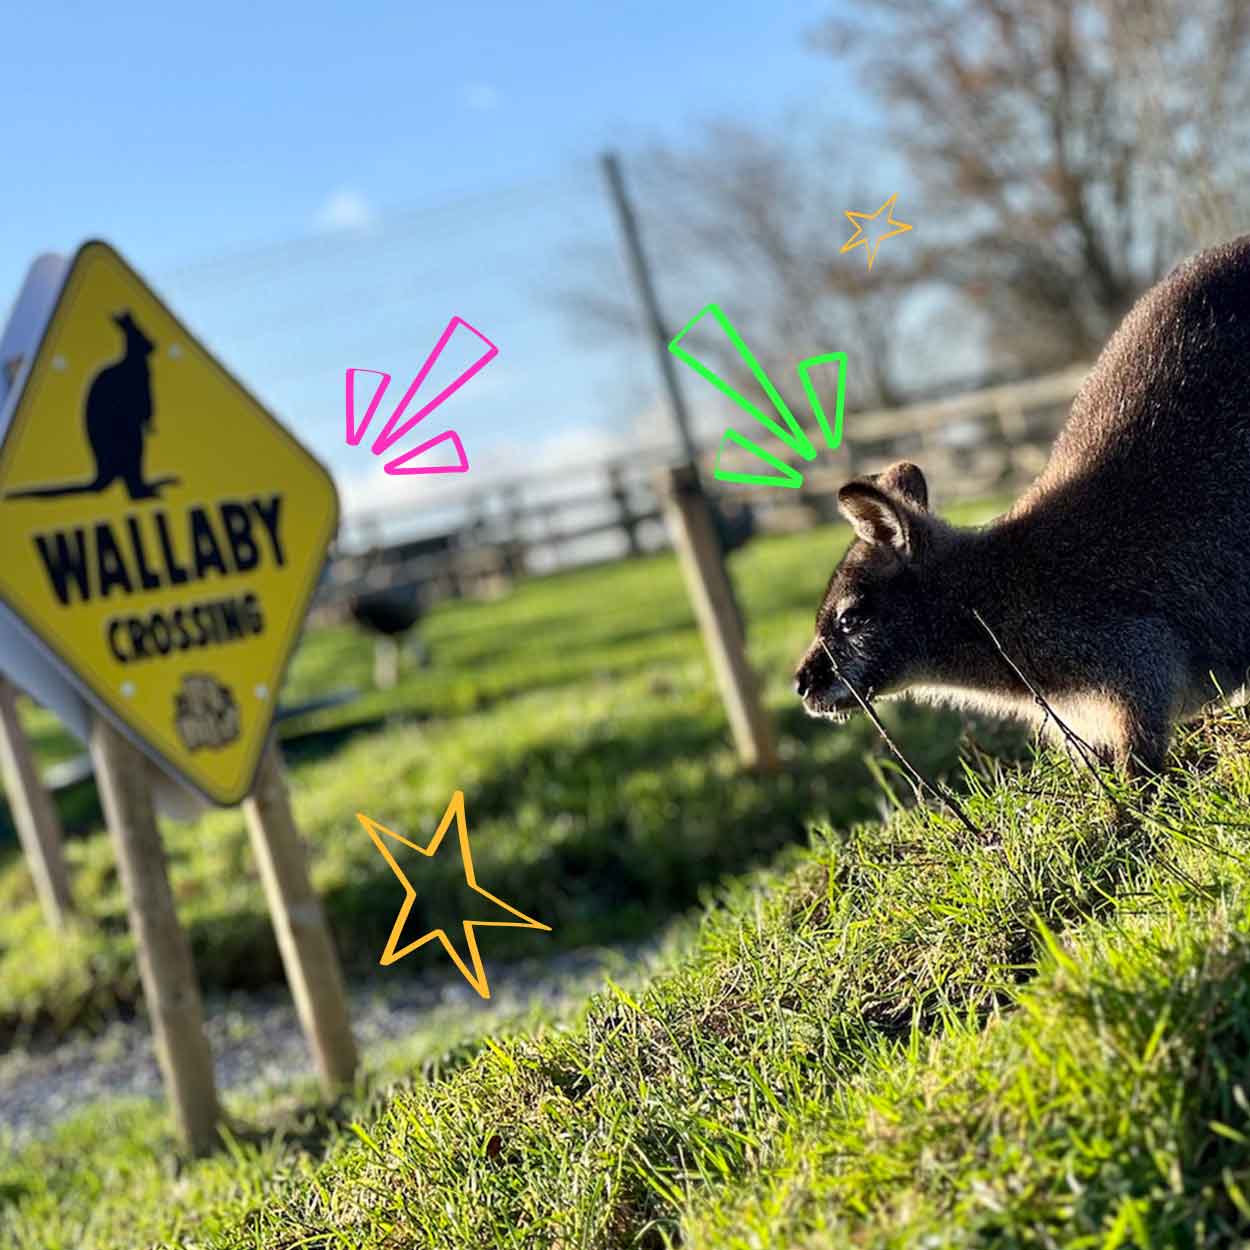 Get up Close to our Wallabies